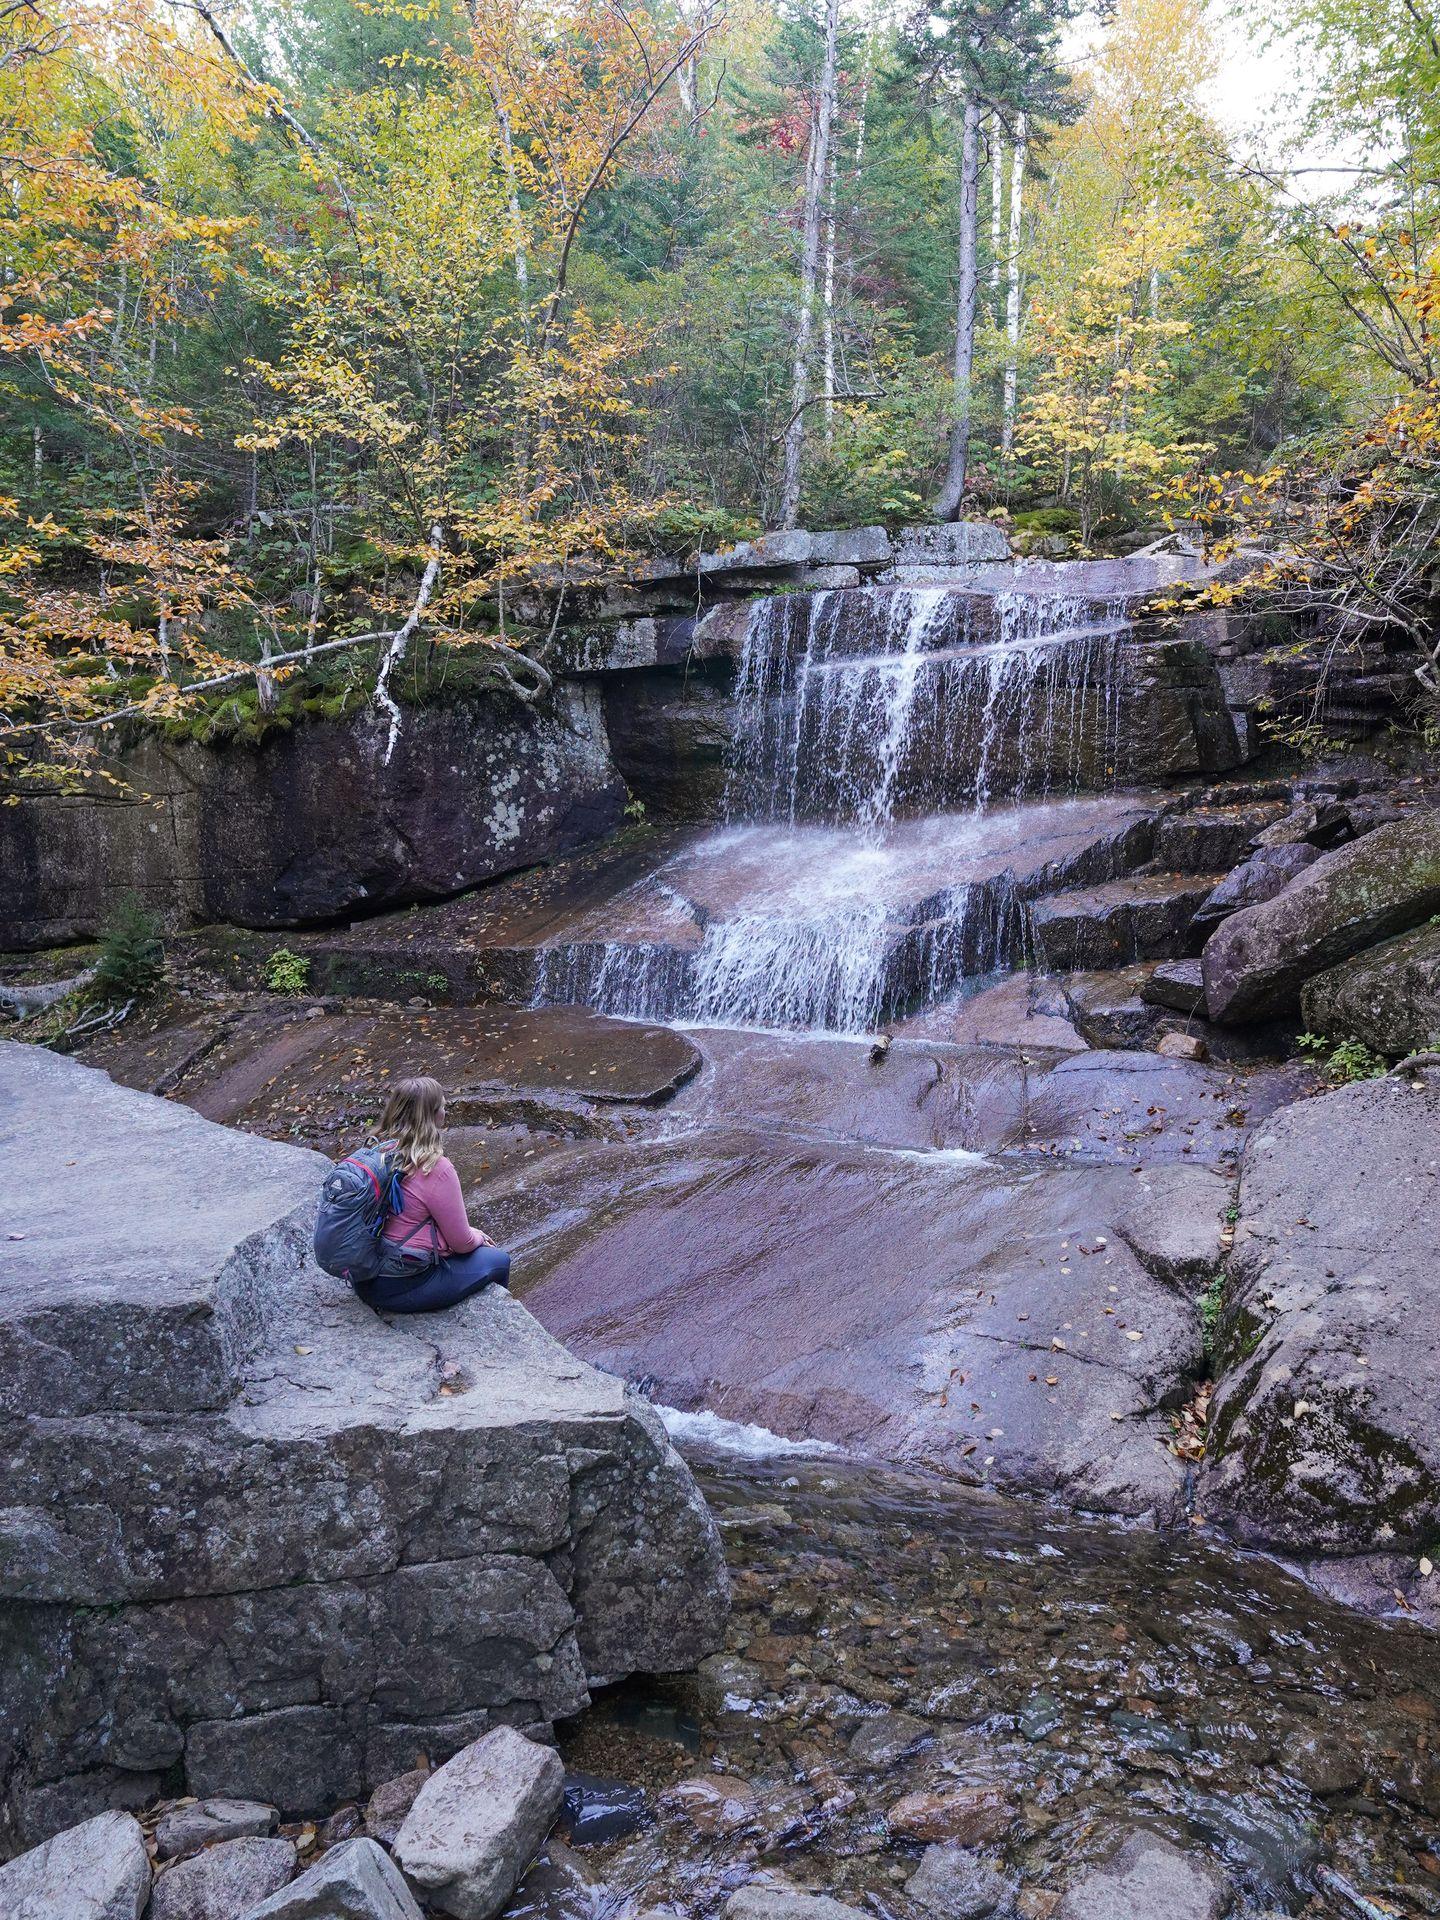 Lydia sitting on a large rock and looking at a small waterfall.